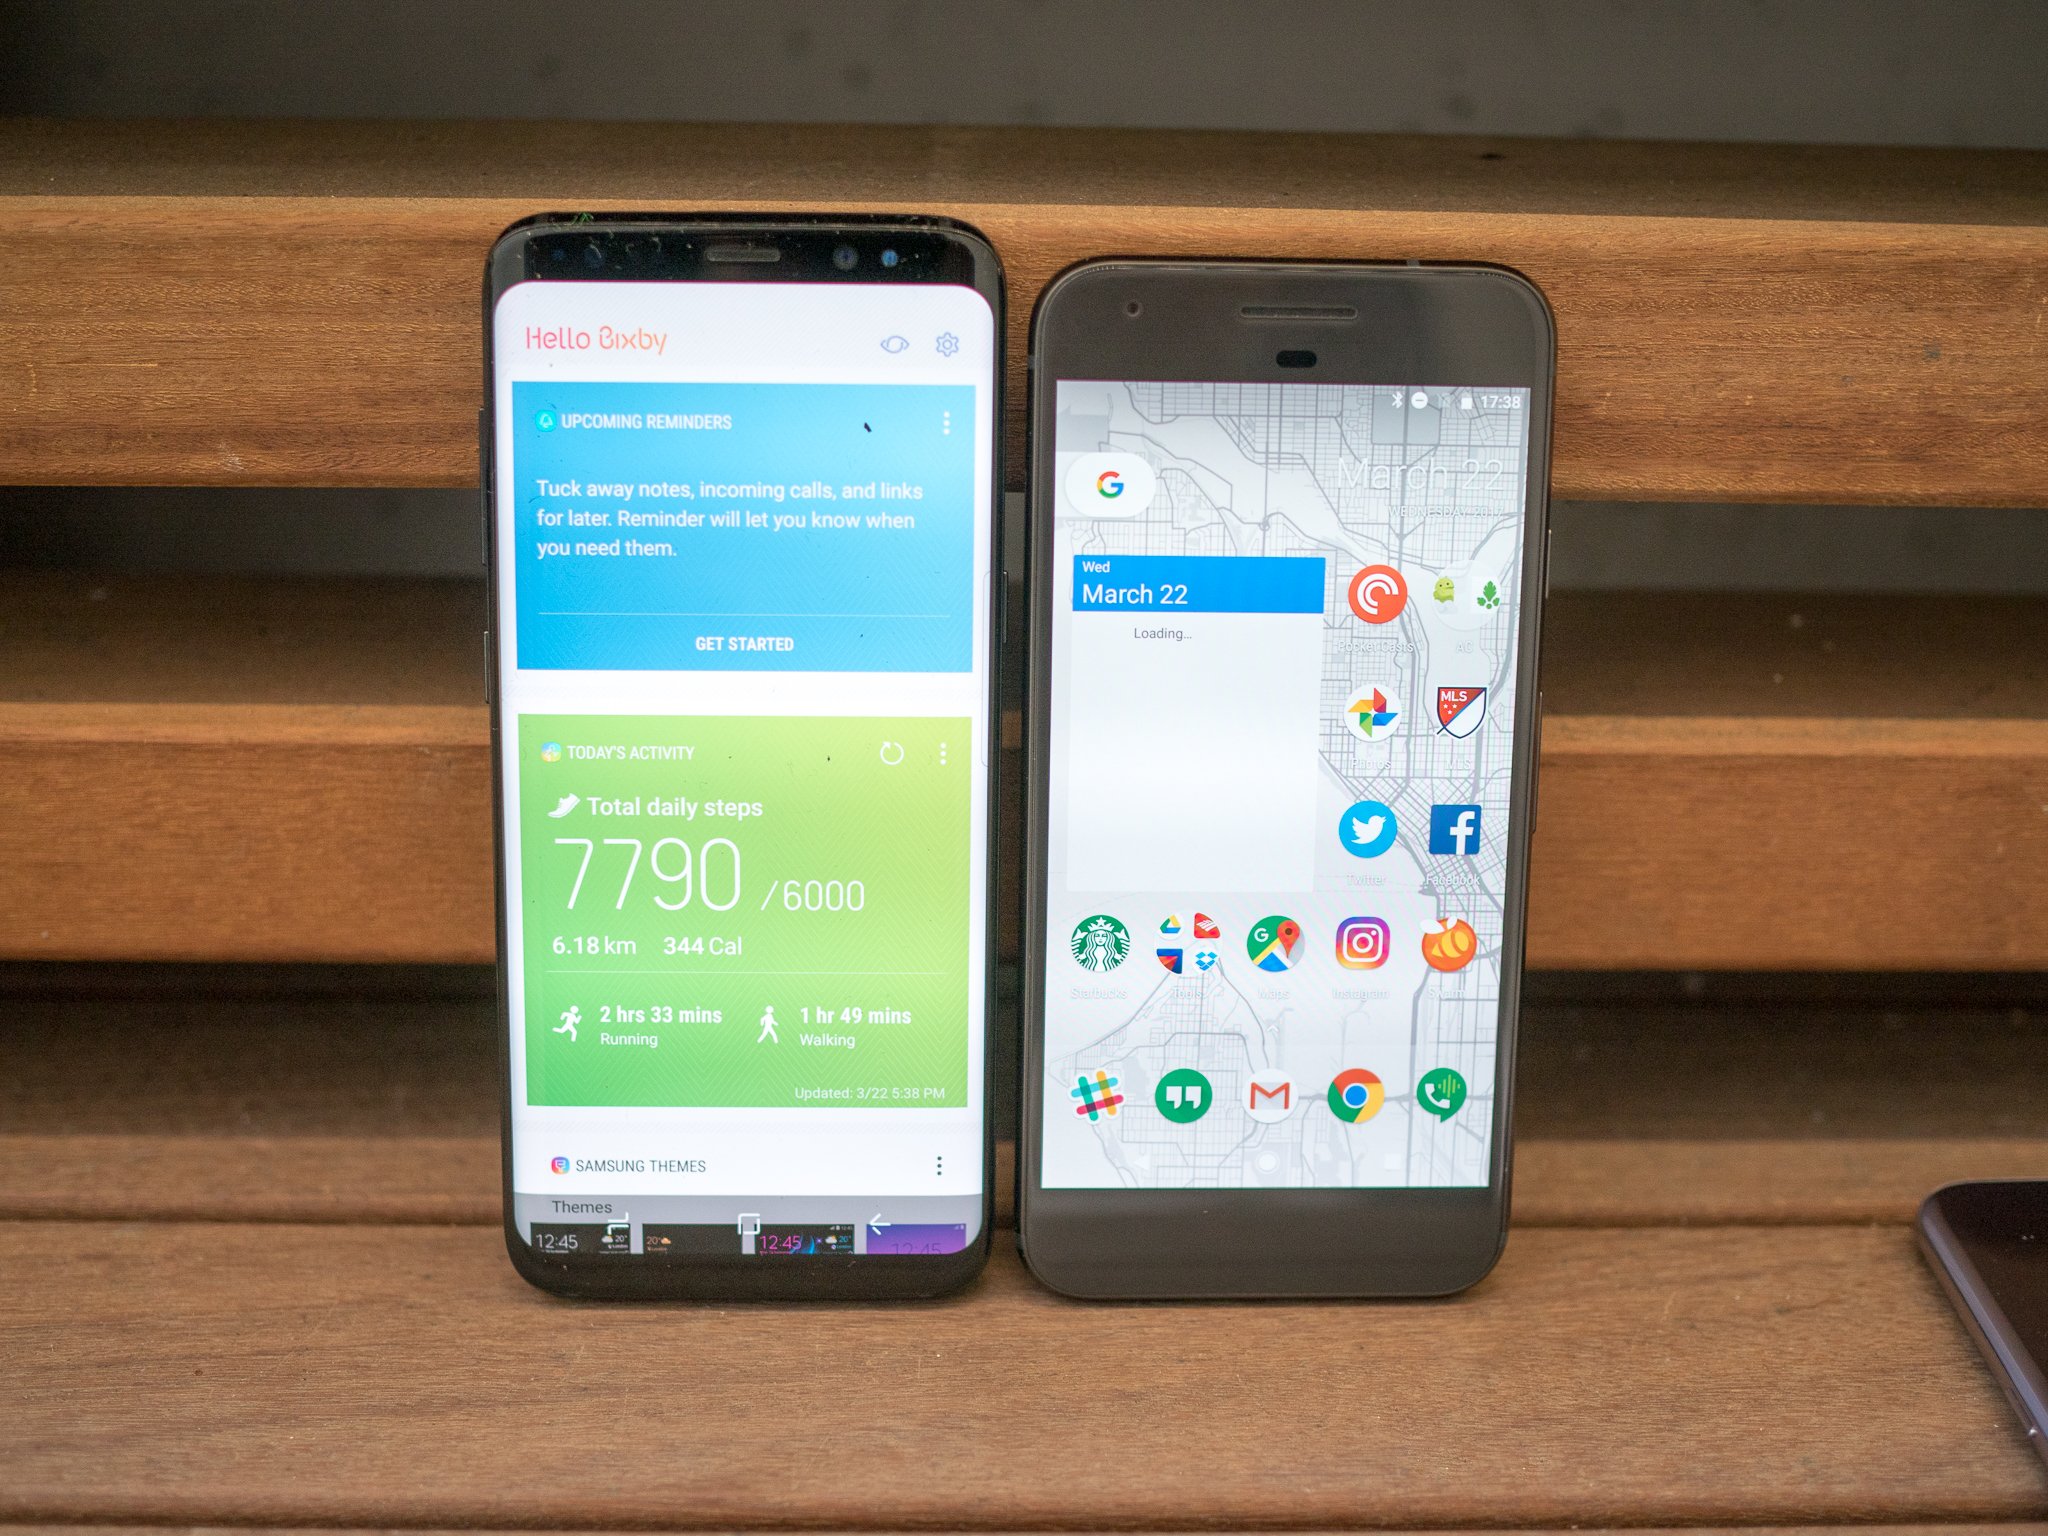 Galaxy S8 and Pixel